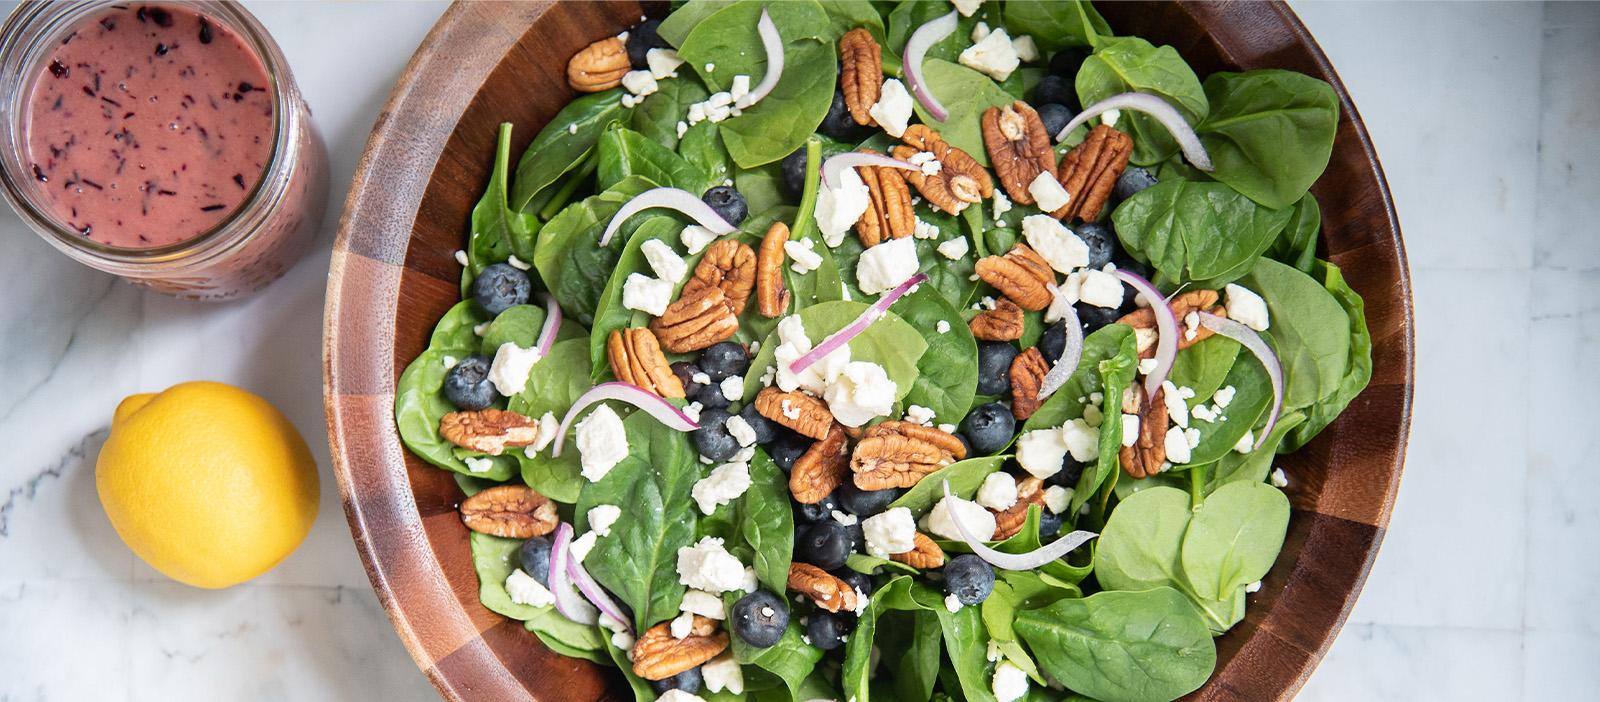 Spinach Salad with Blueberry Vinaigrette